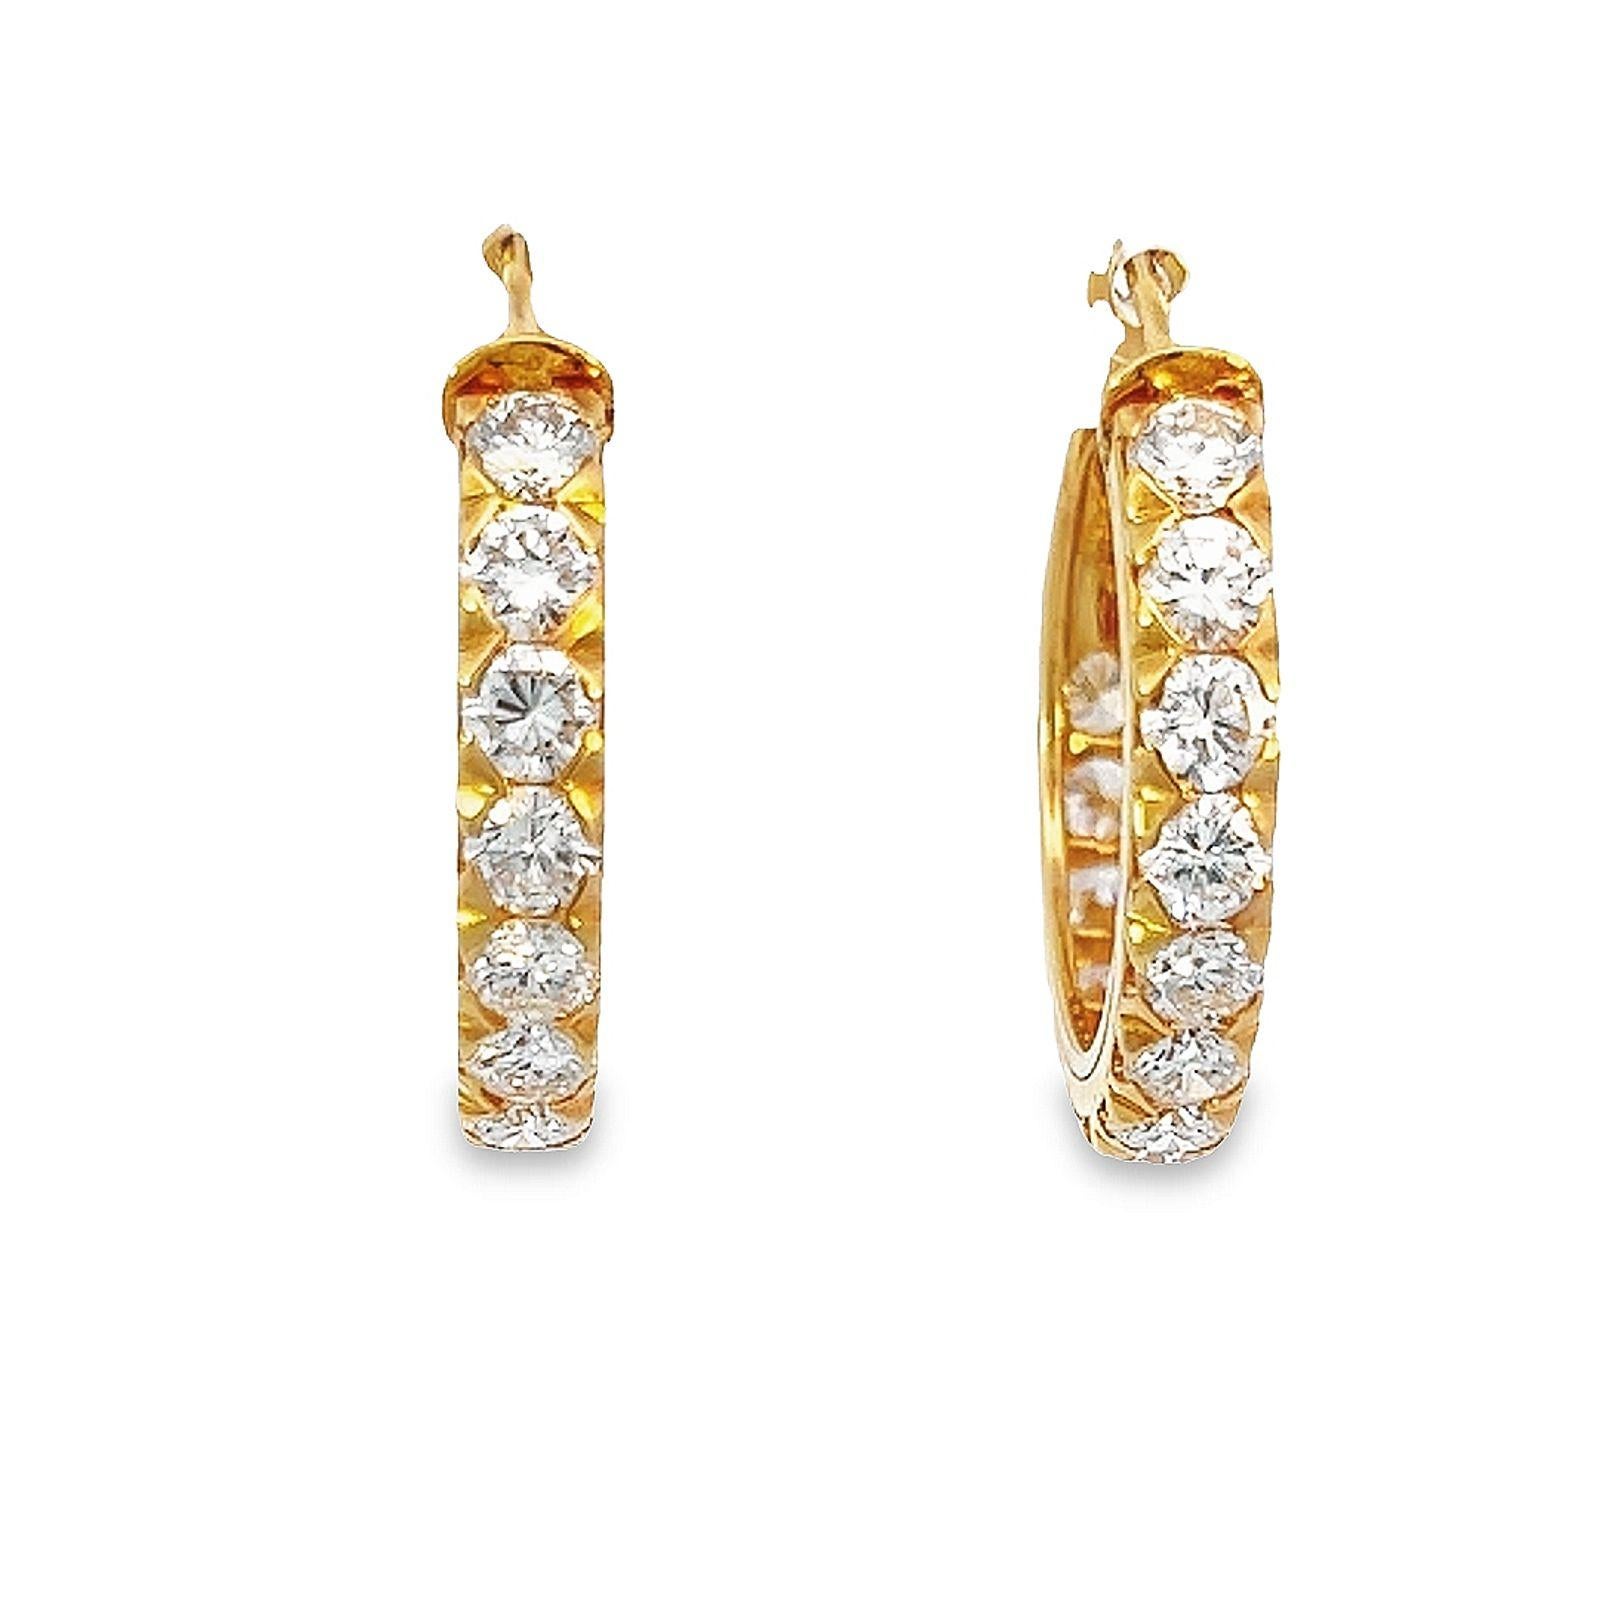 Oscar Heyman 18k yellow gold diamond hoop earrings feature 4 carats of round brilliant-cut diamonds, G/H color, and VS clarity. These dazzling gems possess a captivating sparkle and purity that make them an ideal choice for daily wear. Their radiant